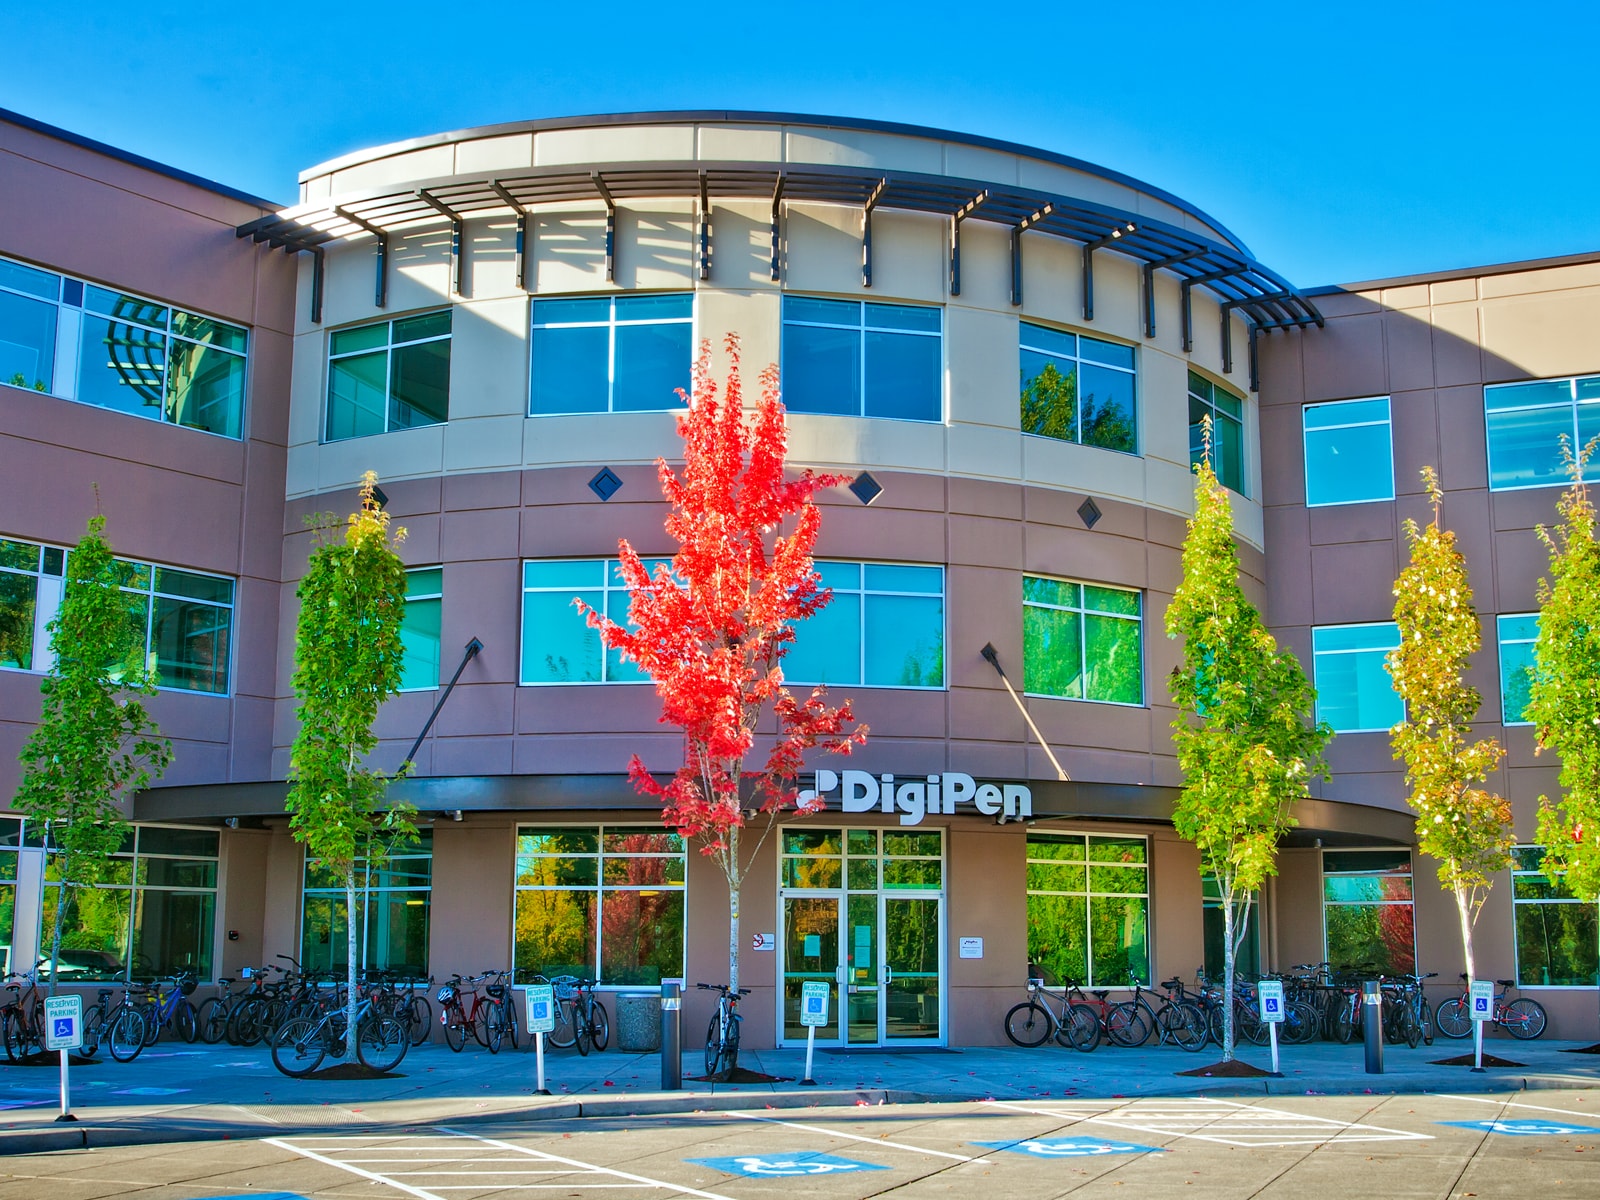 Close-up of the DigiPen front entrance on a sunny autumn day